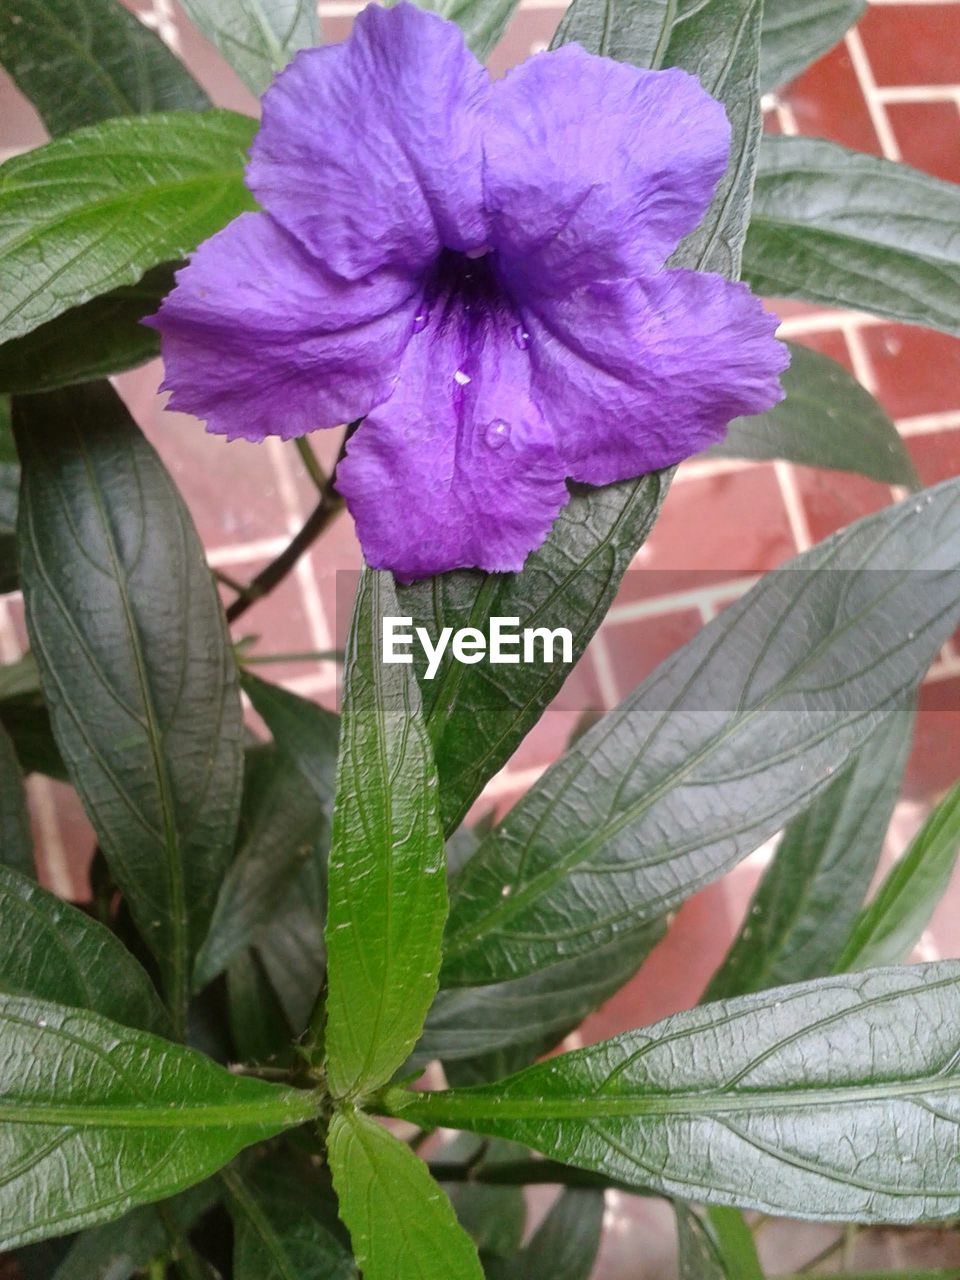 plant, flowering plant, flower, growth, leaf, plant part, beauty in nature, freshness, fragility, close-up, nature, petal, flower head, inflorescence, purple, day, no people, green, outdoors, botany